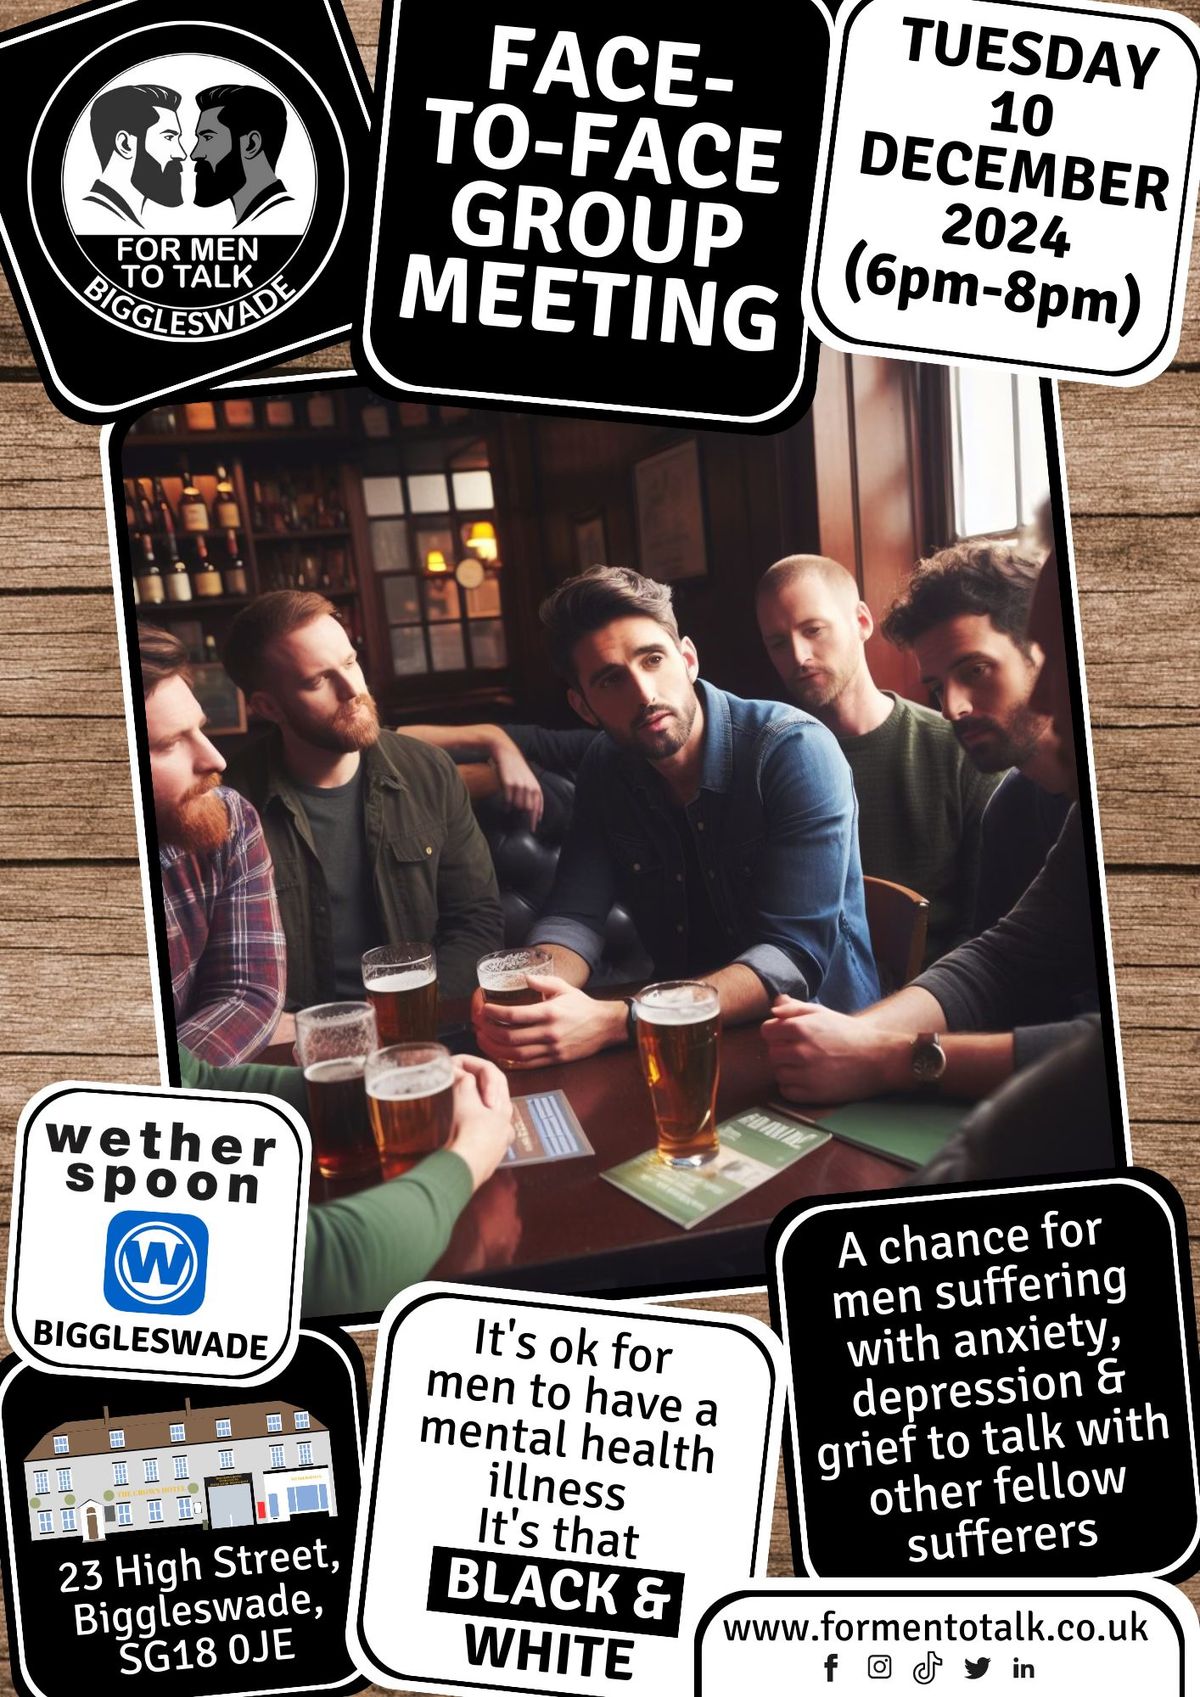 'For Men To Talk' Face-to-Face Group Meeting (Biggleswade)